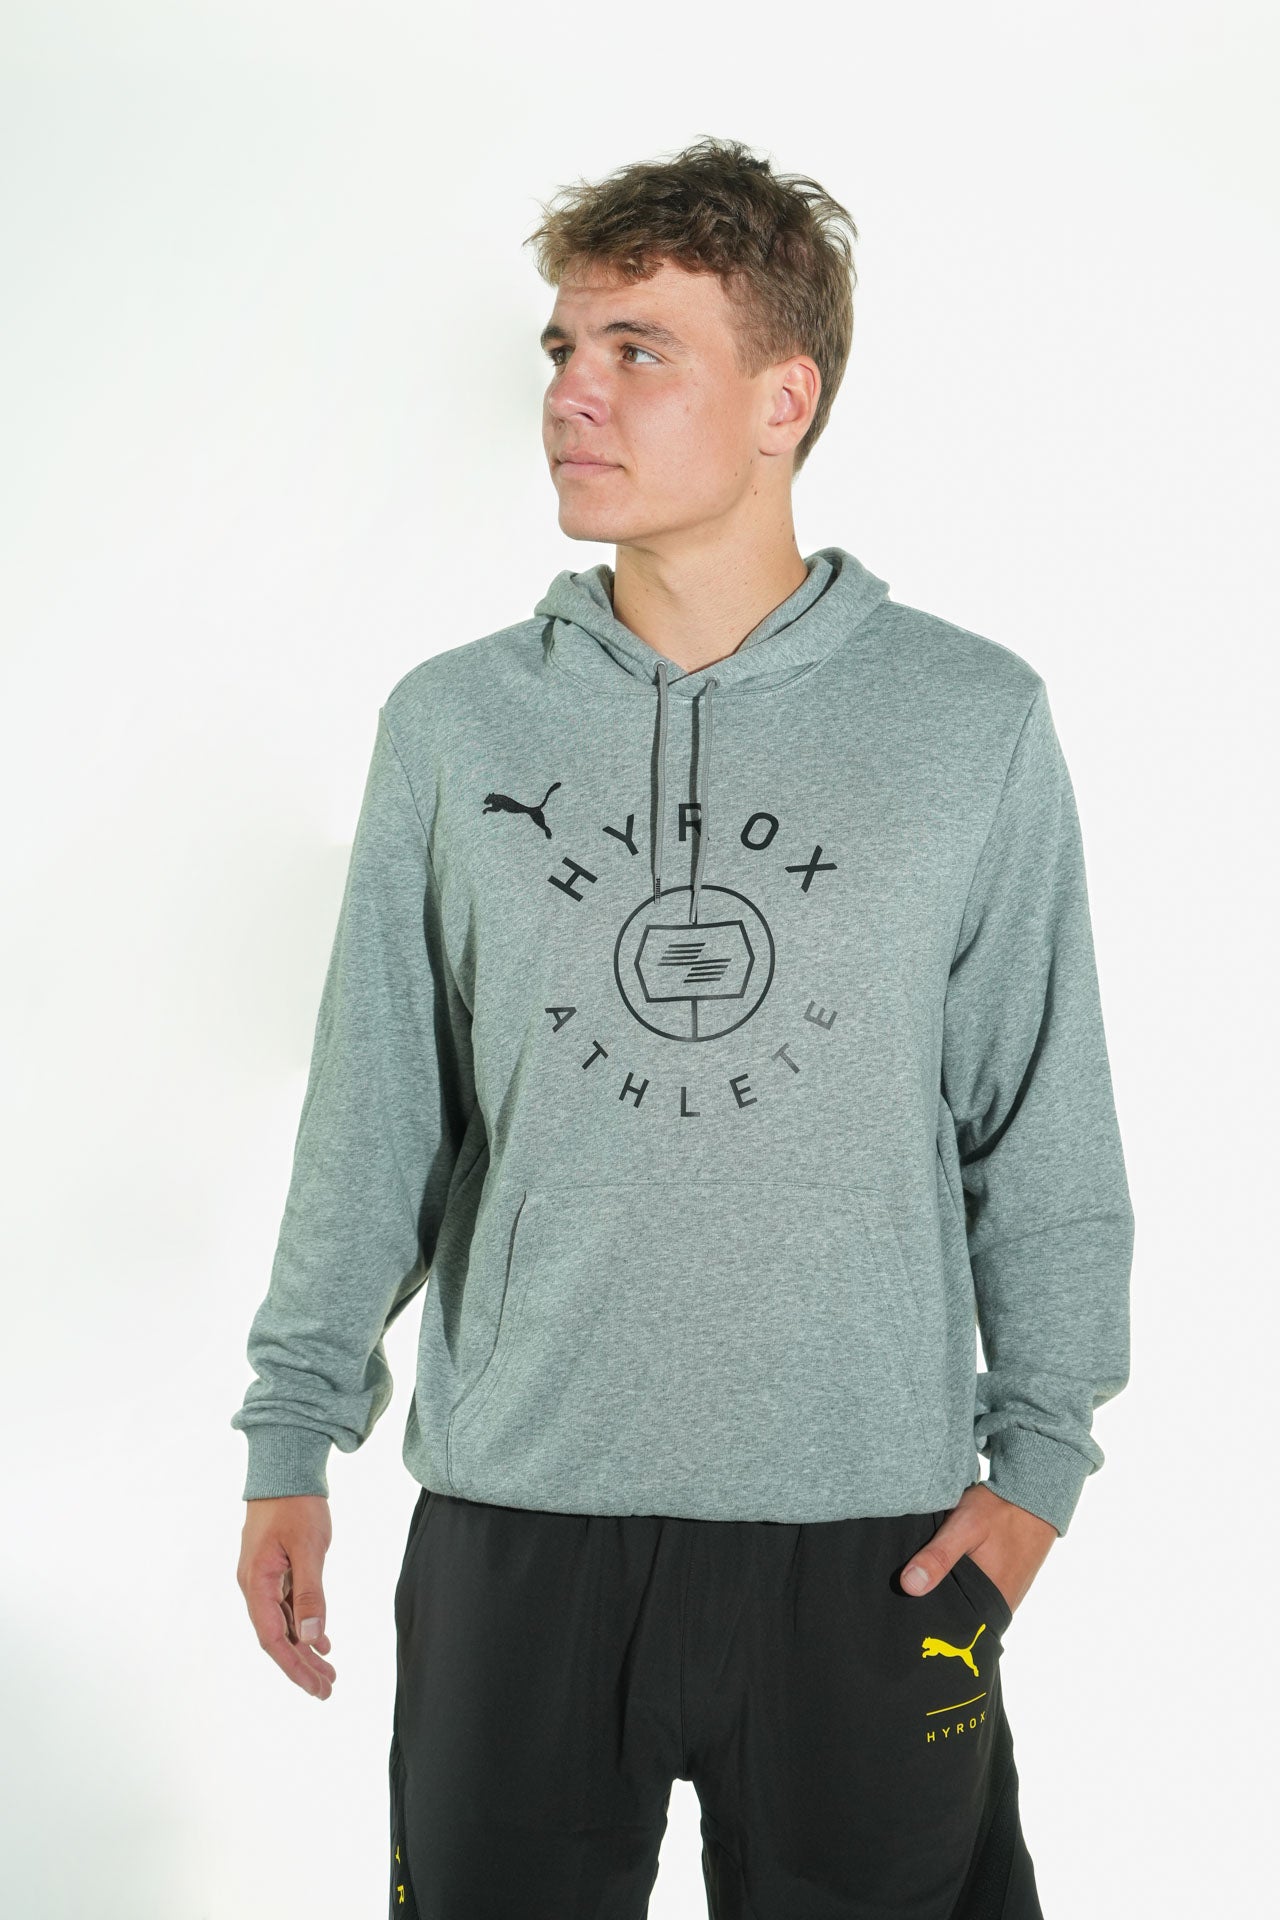 teamGOAL 23 Casuals Hoodie - gray